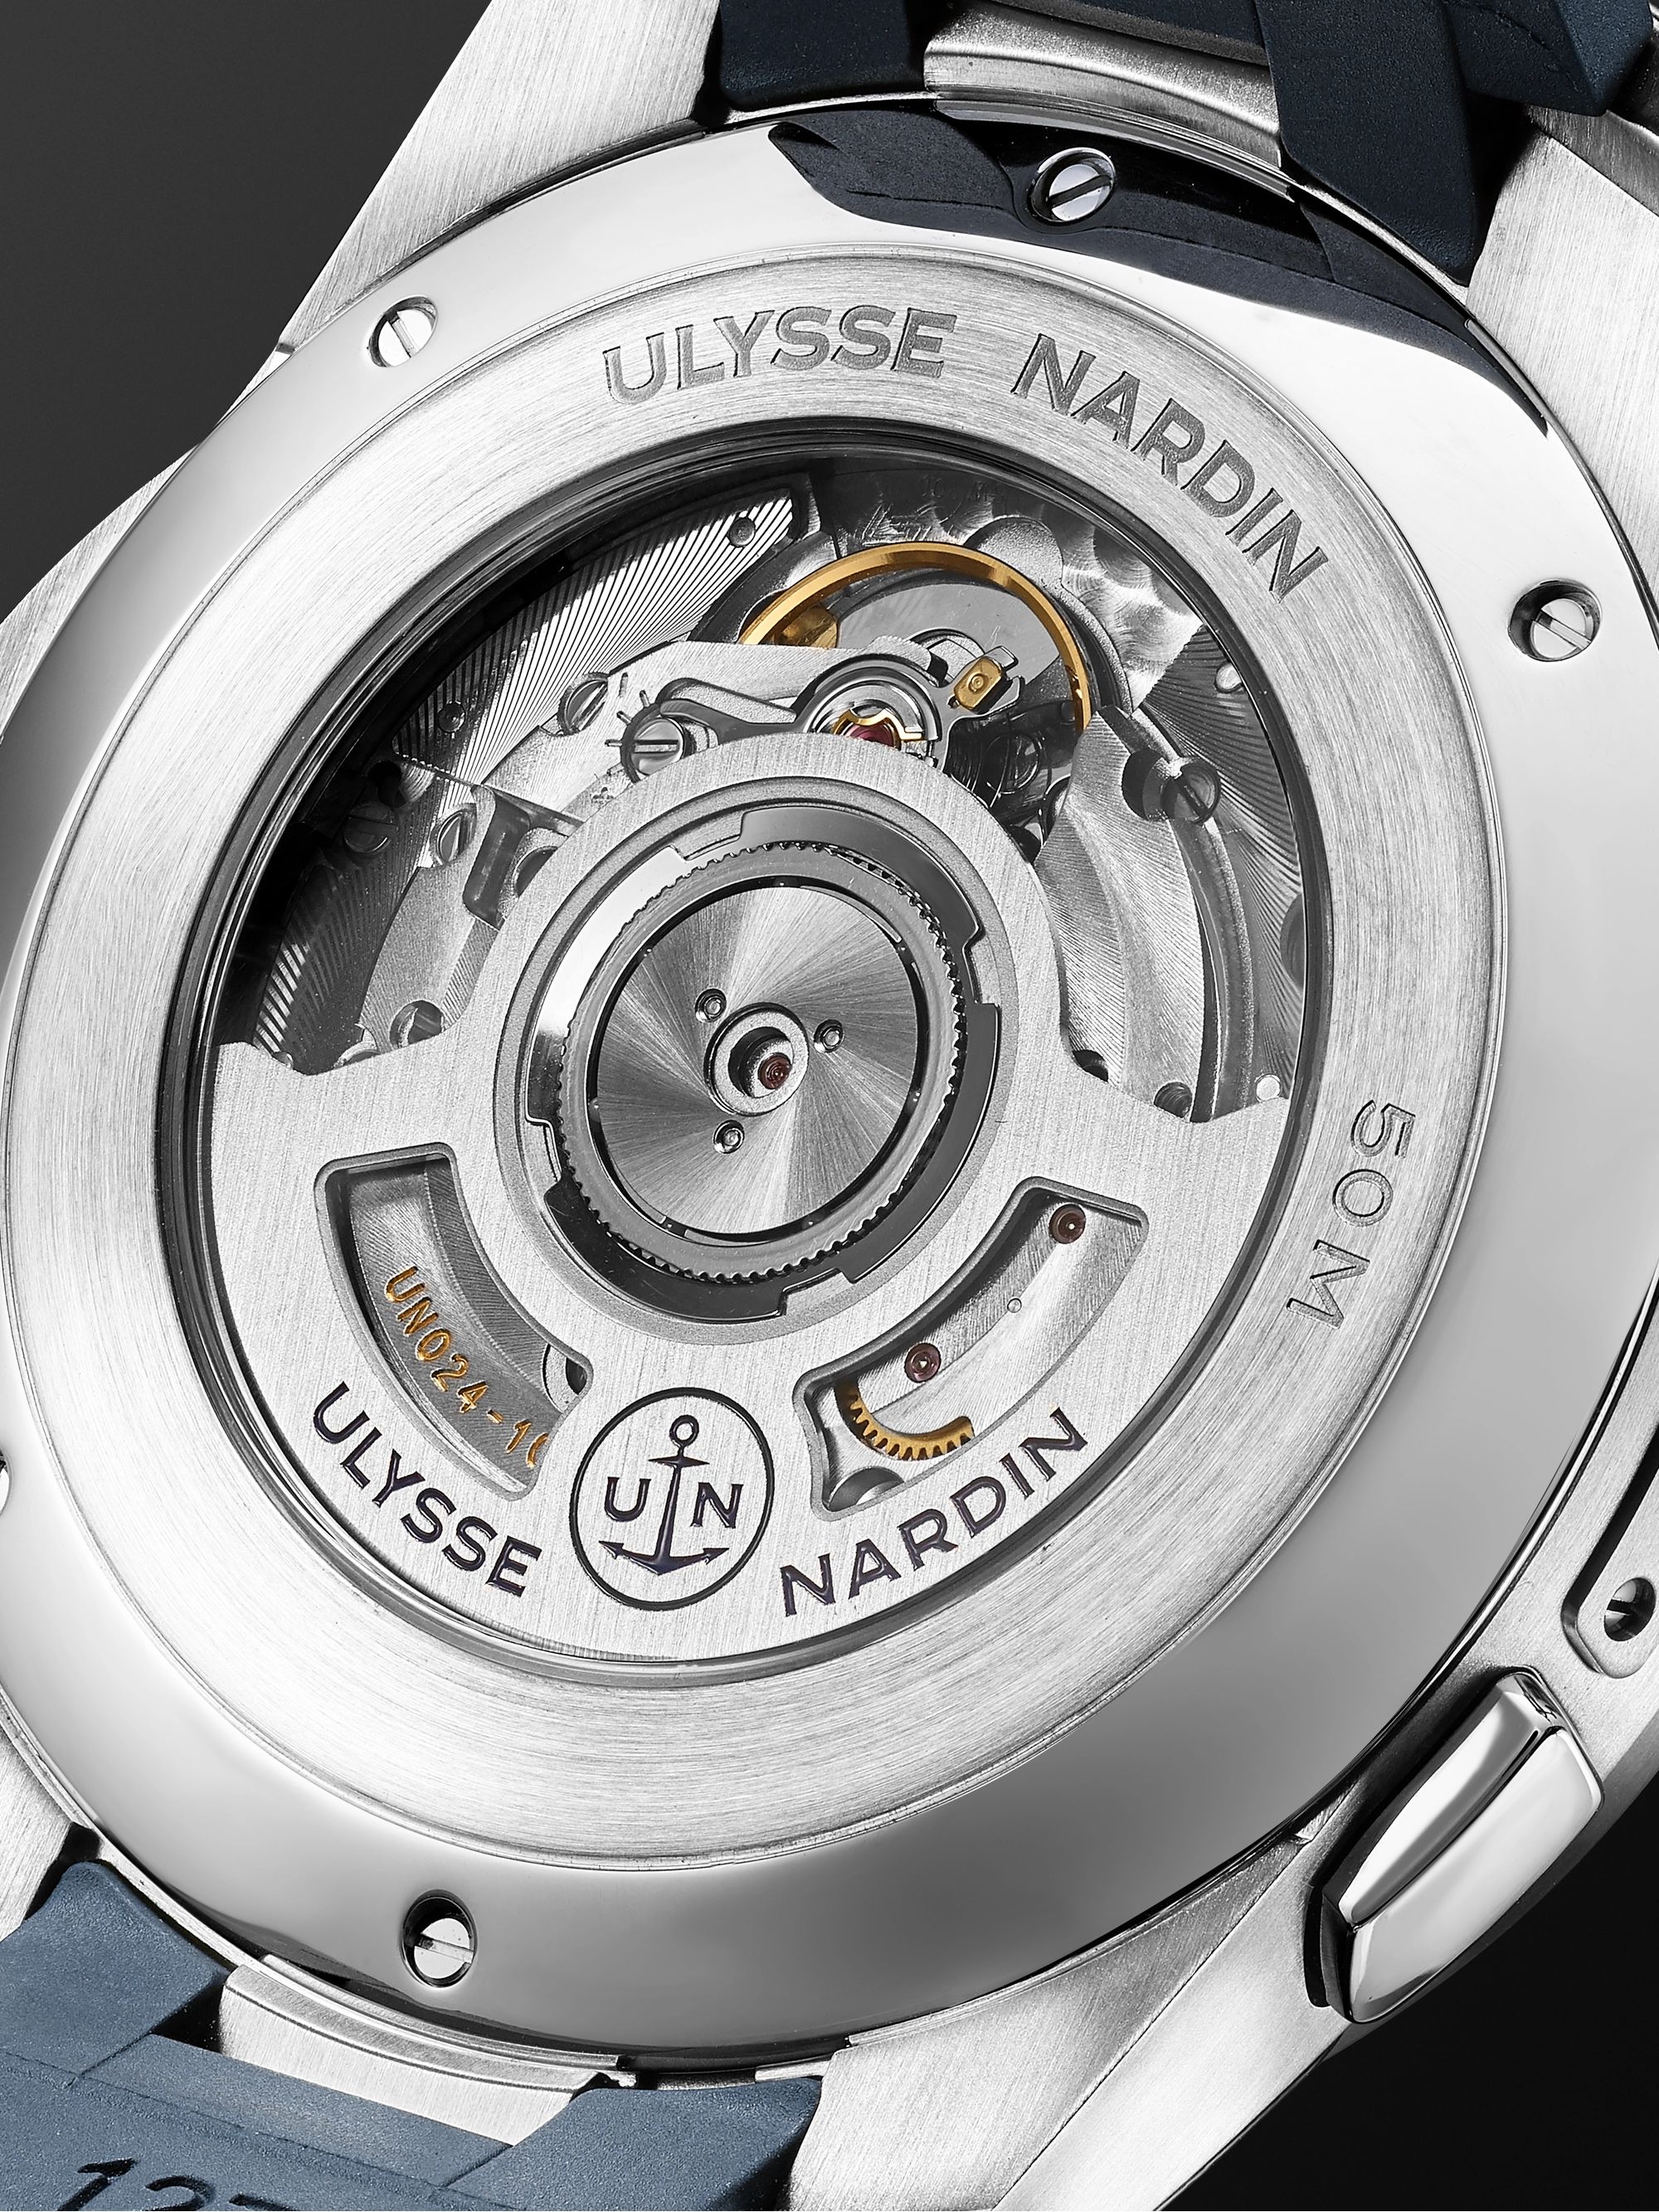 ULYSSE NARDIN Dual Time Automatic 42mm Stainless Steel and Rubber Watch, Ref. No. 243-20-3/43